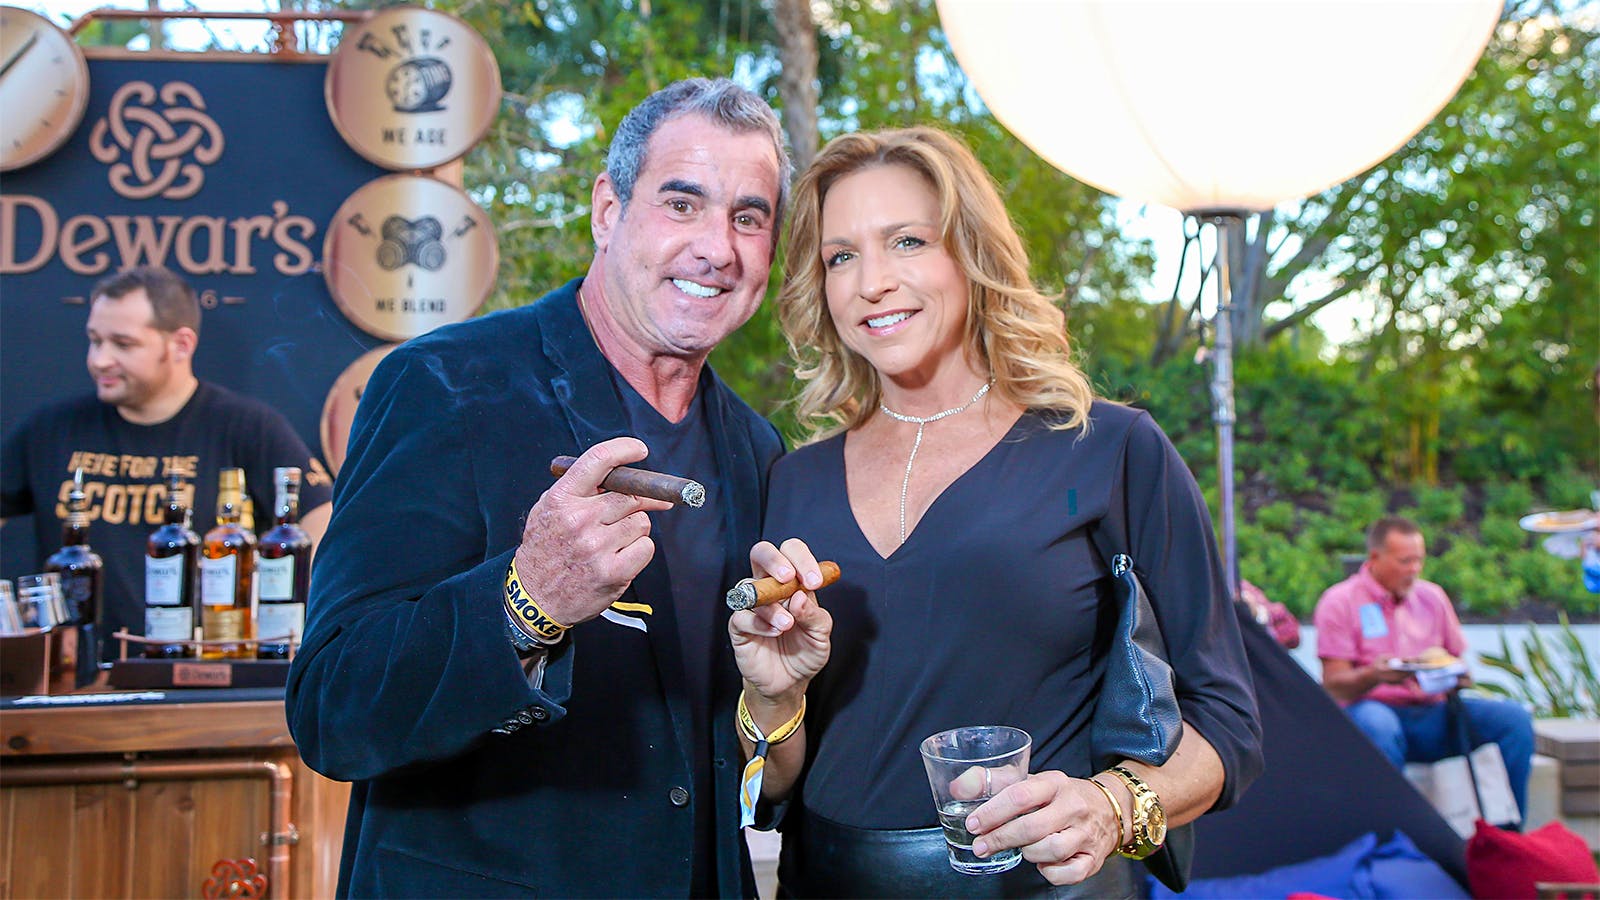 Shannon Quigley and Michael Marin enjoy a cigar with their drinks during the event.